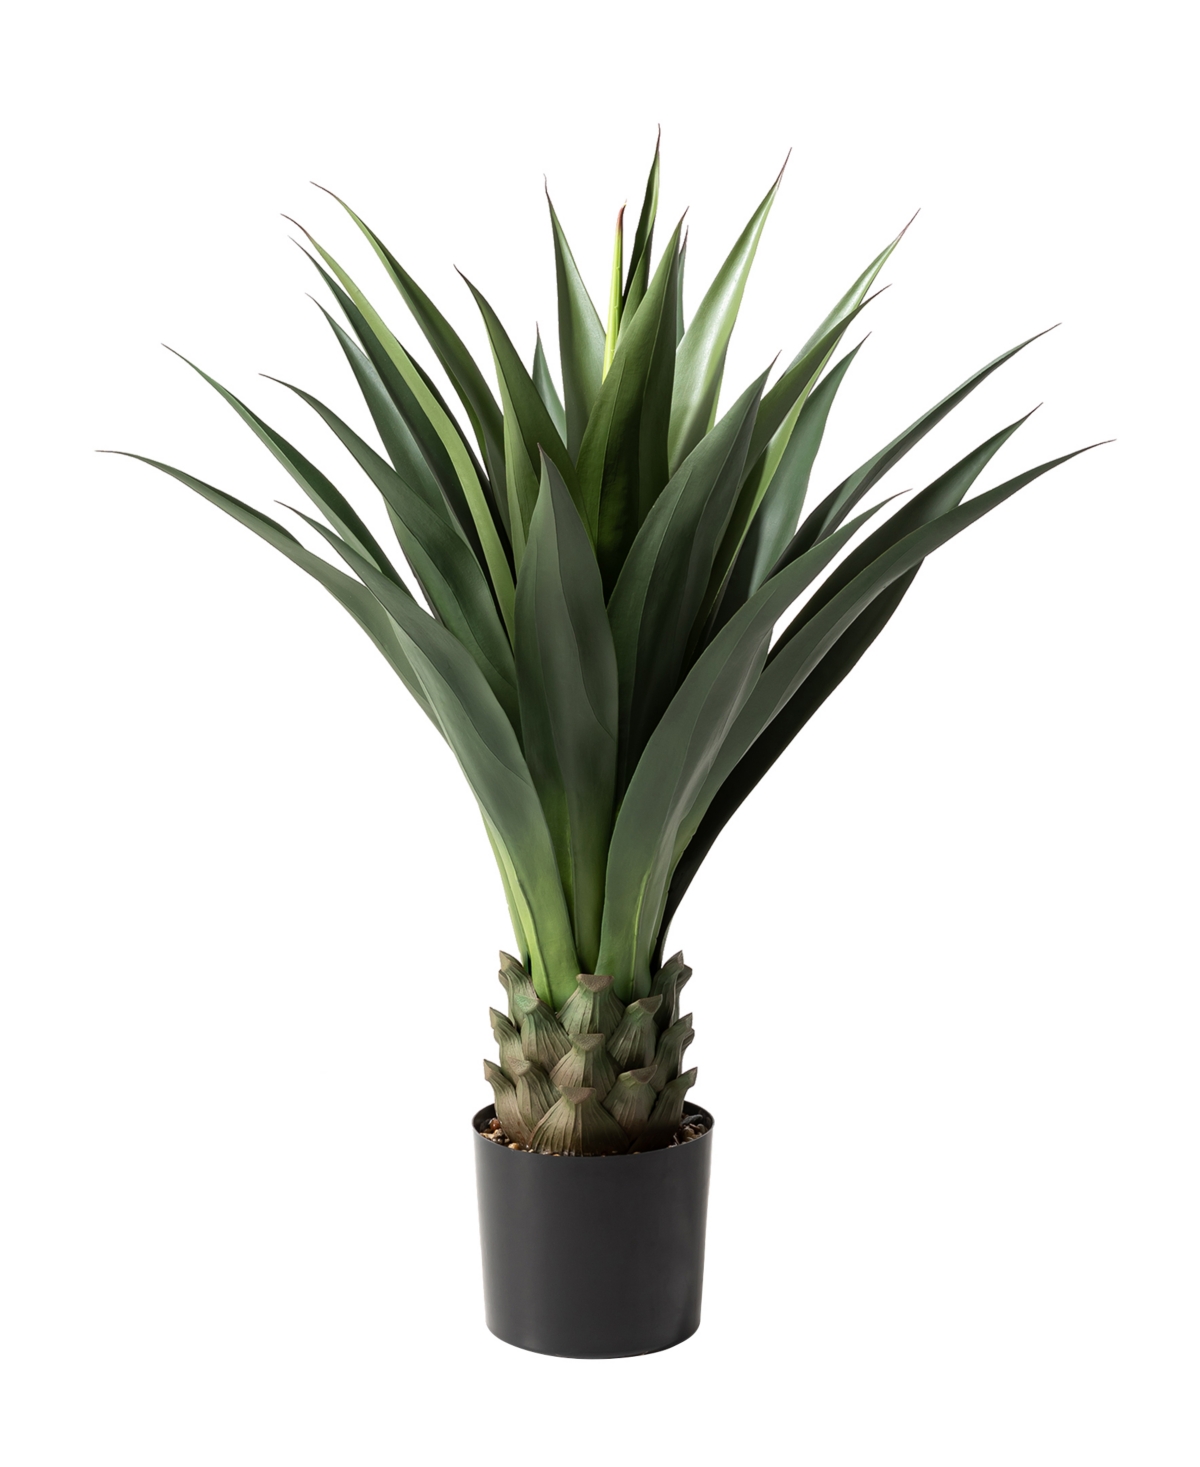 3.25ft. Faux Agave Plant in Pot - Multi